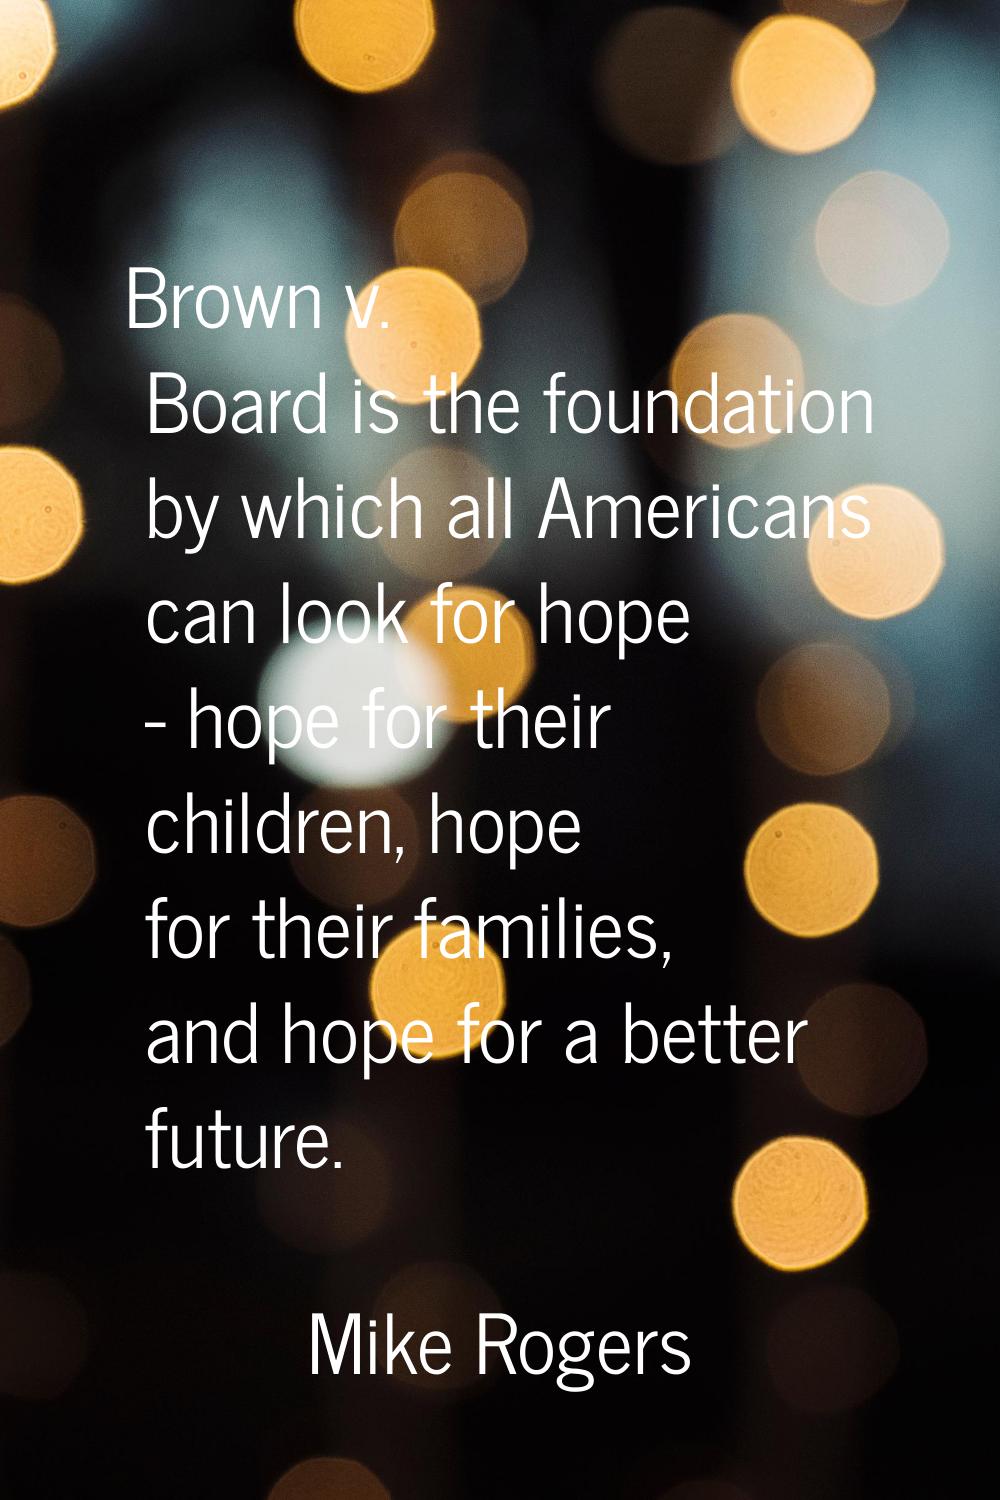 Brown v. Board is the foundation by which all Americans can look for hope - hope for their children